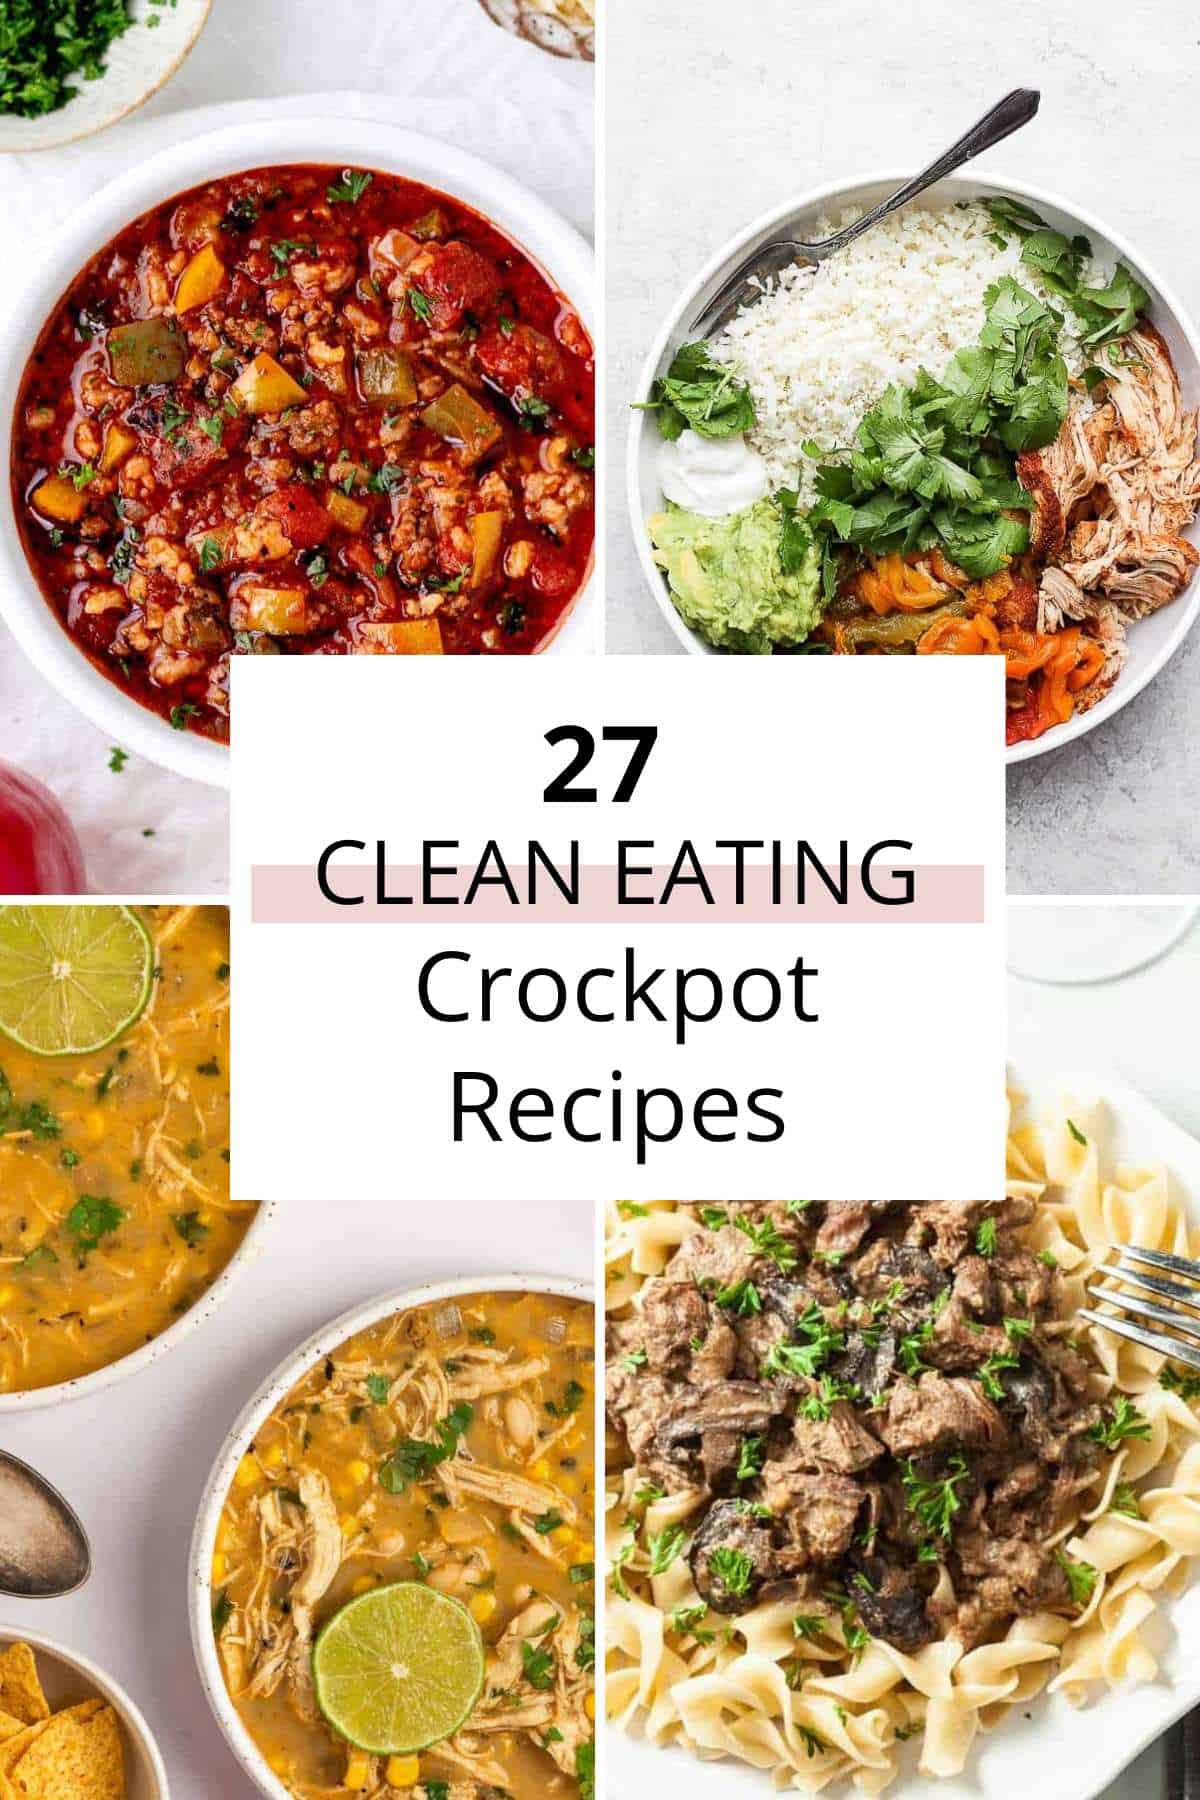 27 Easy & Healthy Clean Eating Crockpot Recipes